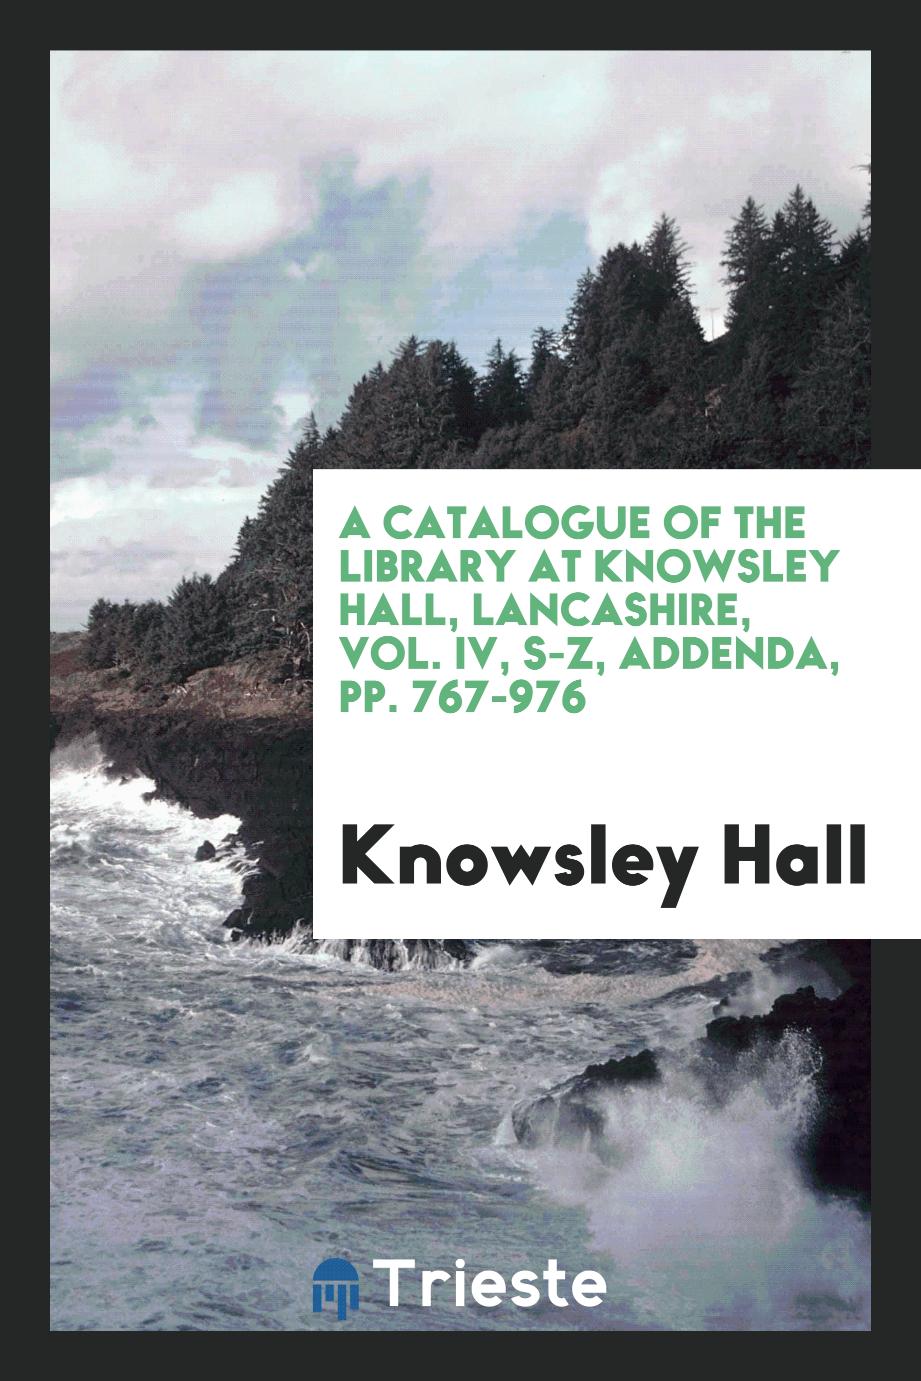 A Catalogue of the Library at Knowsley Hall, Lancashire, Vol. IV, S-Z, Addenda, Pp. 767-976